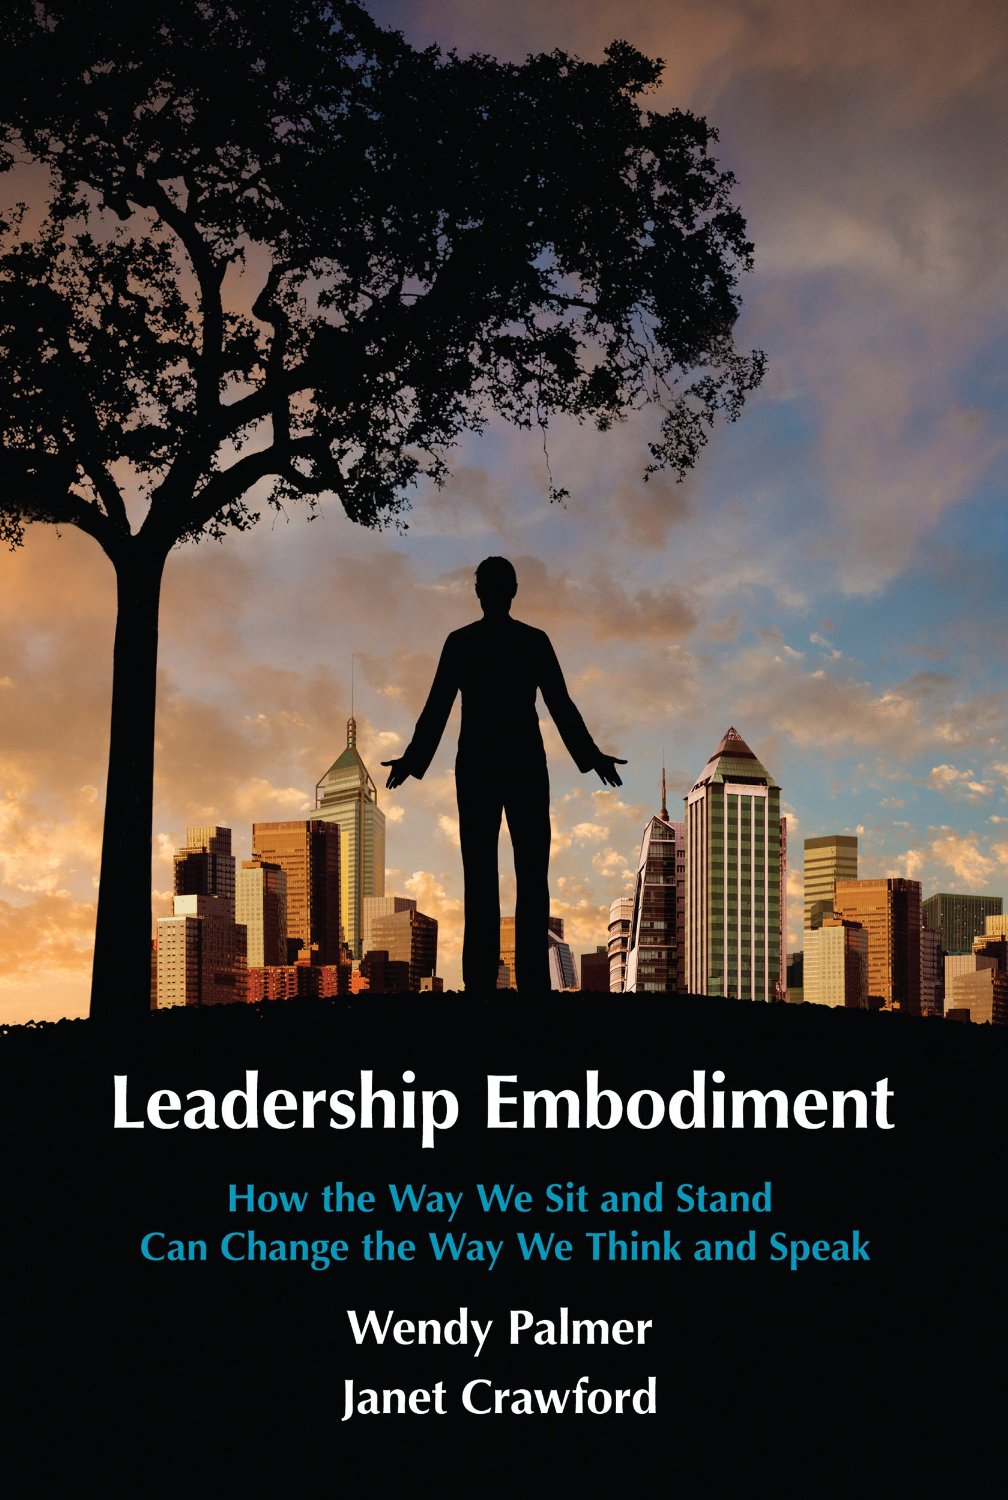 Leadership Embodiment: How The Way We Sit And Stand Can Change The Way We Think And Speak